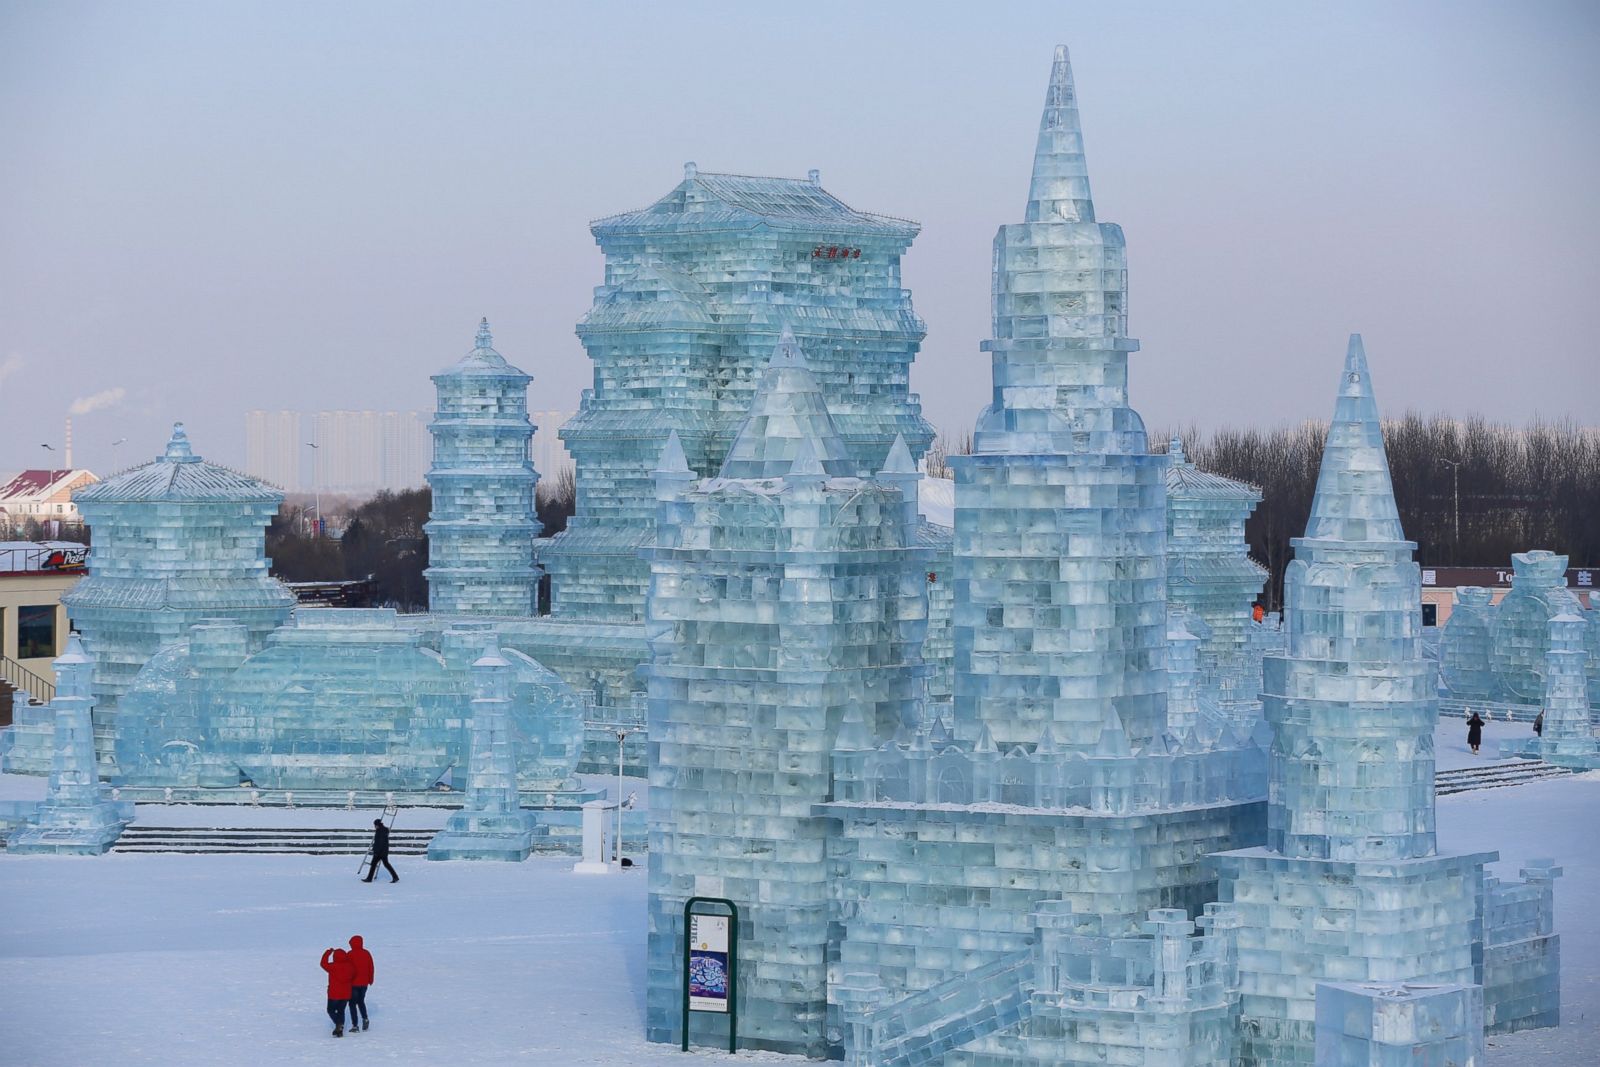 Picture | Harbin International Ice and Snow Festival - ABC News1600 x 1067